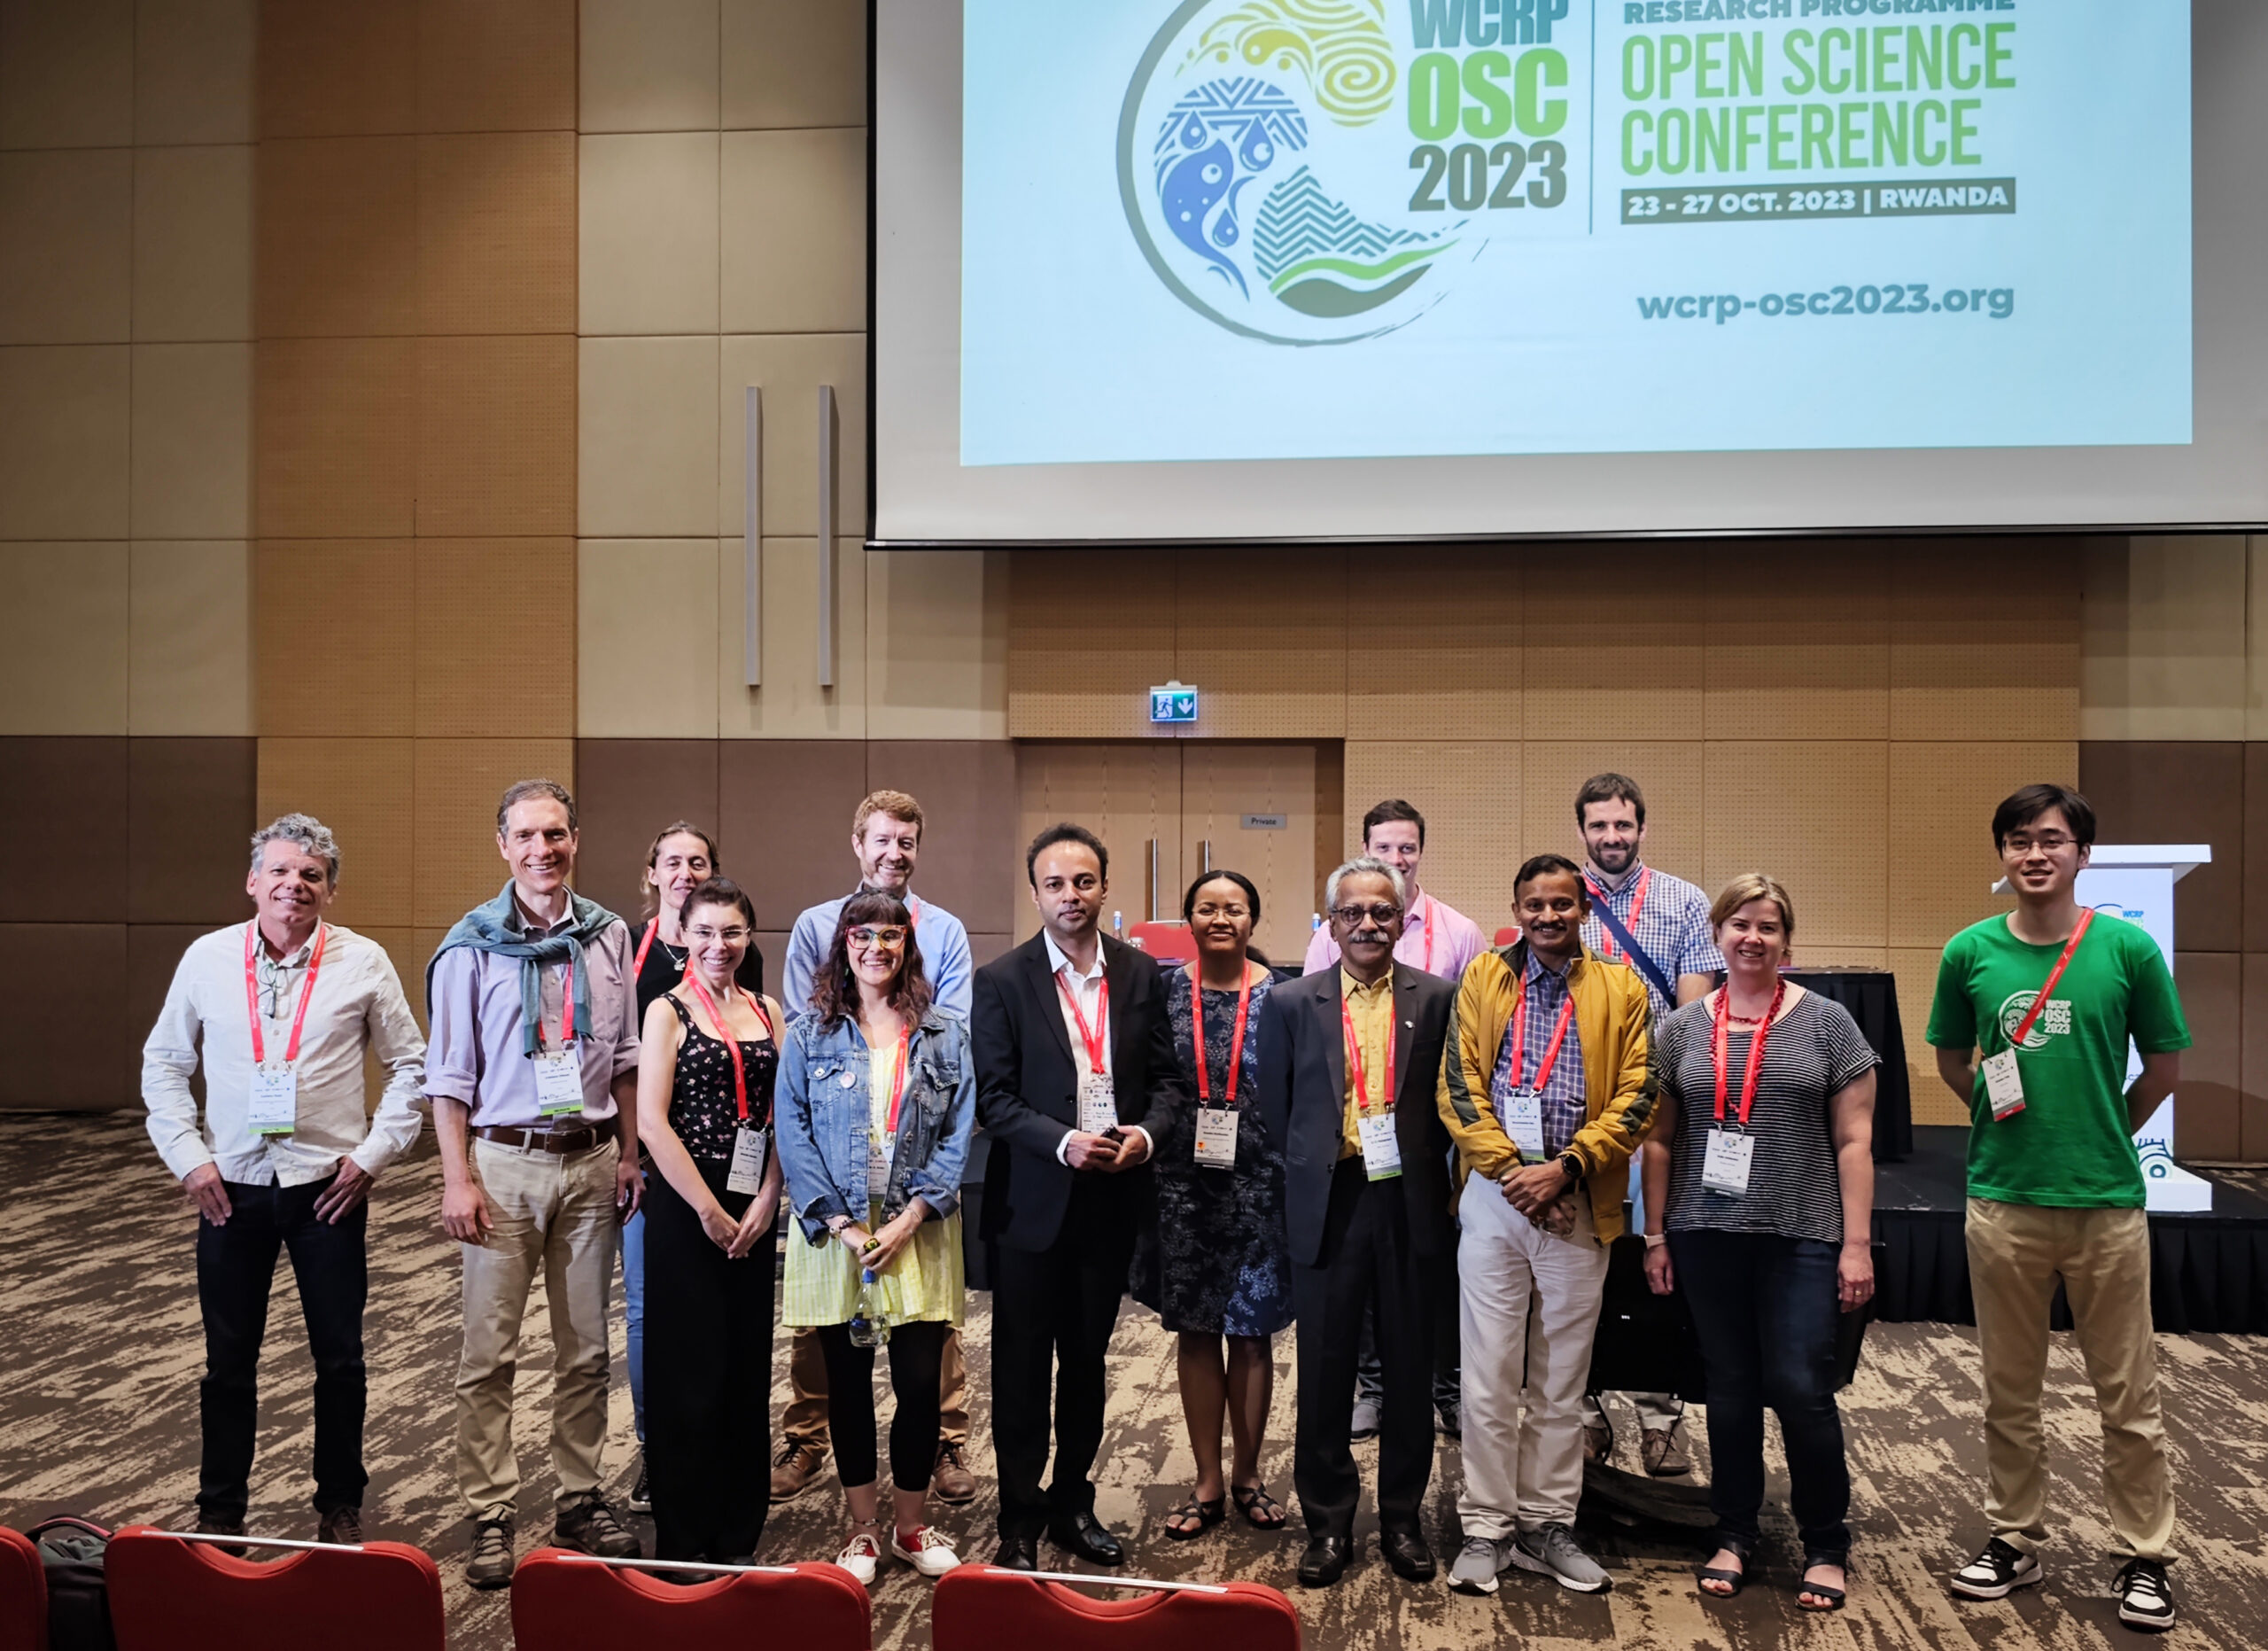 Monsoon Panel at the WCRP Open Science Conference in Kigali, Rwanda, October 2023